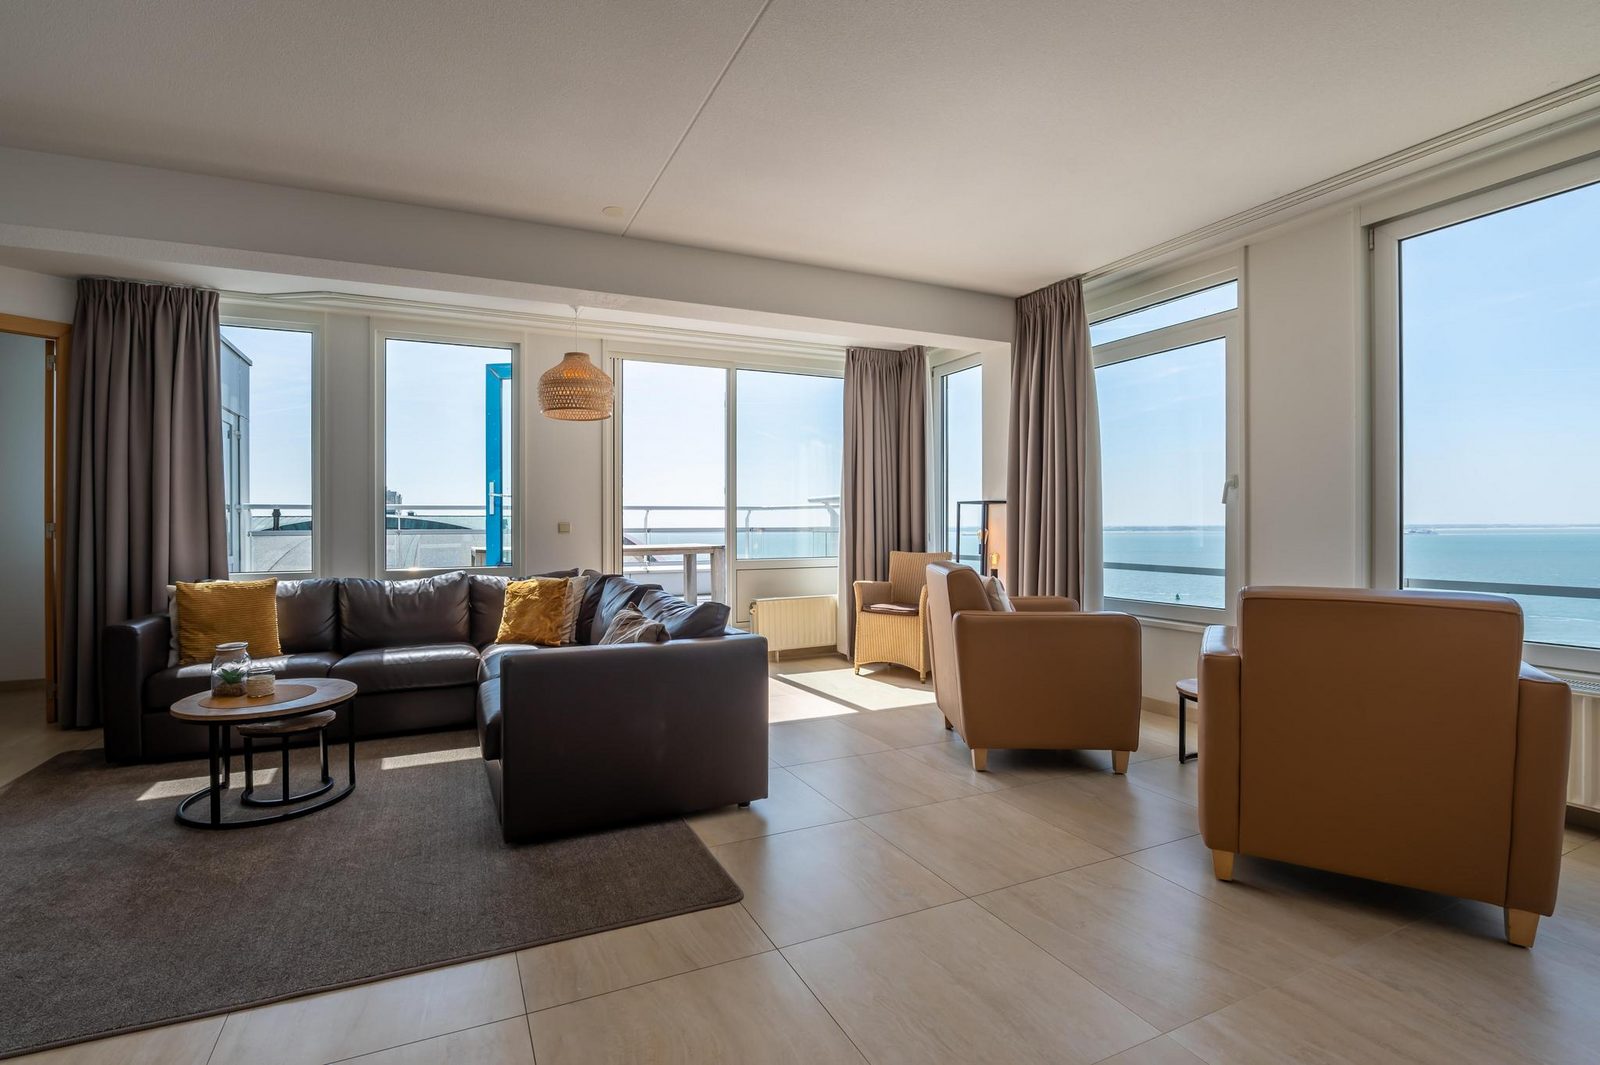 Penthouse 748 with ocean view